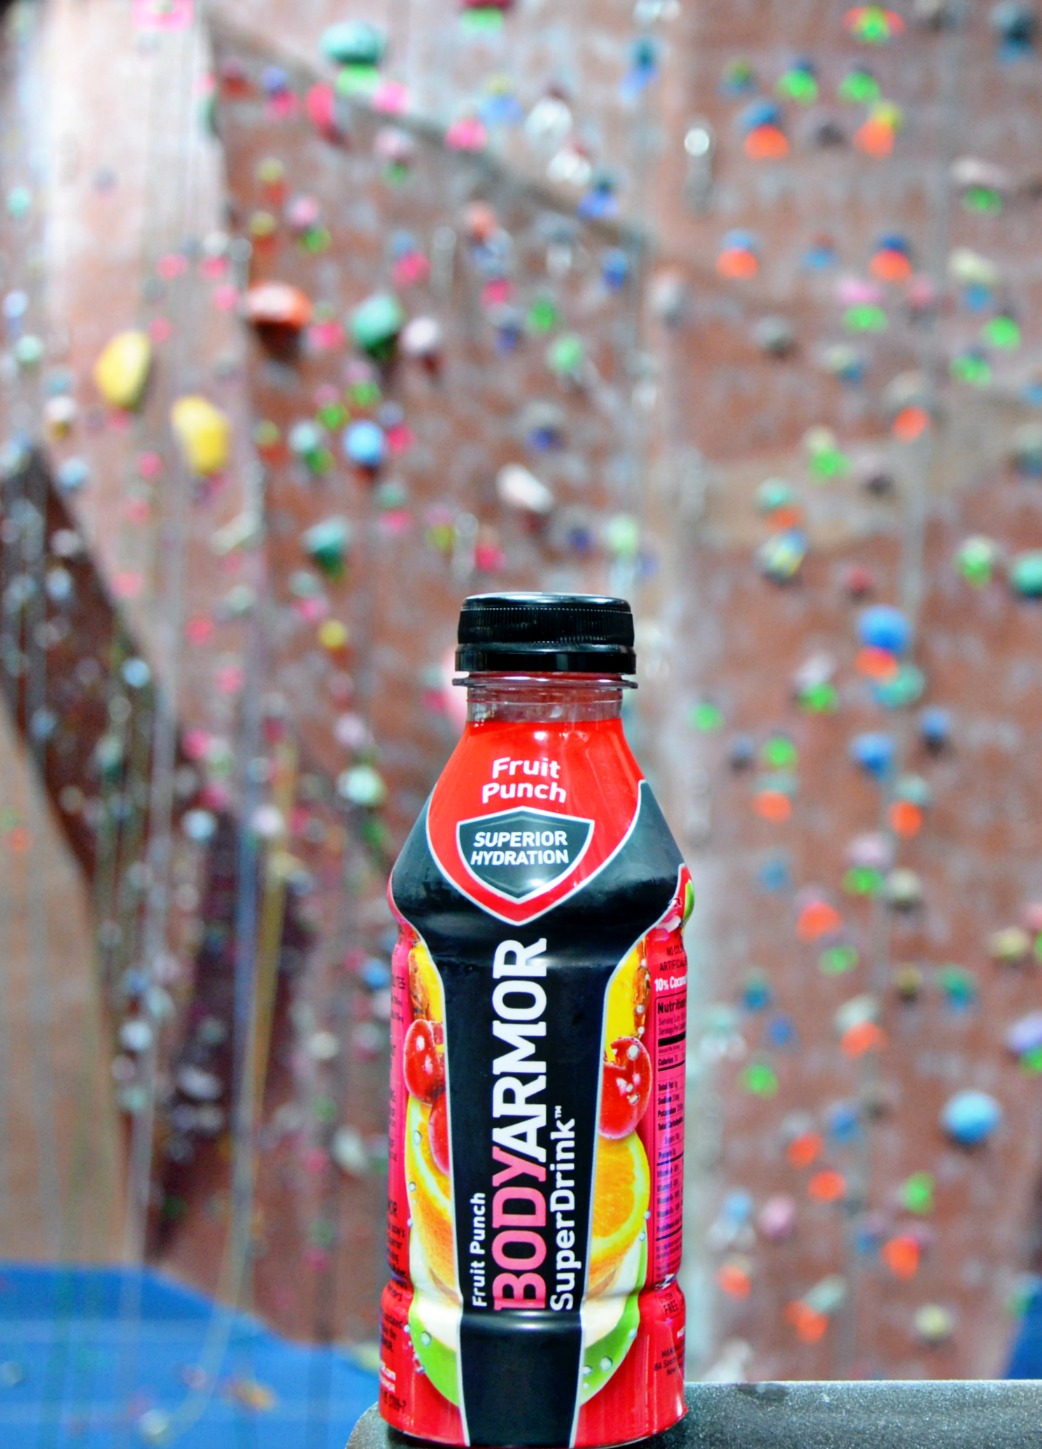 Hydration for young athletes is so important and BODYARMOR sports drink is the perfect drink with no added sweeteners or colors from artificial sources.